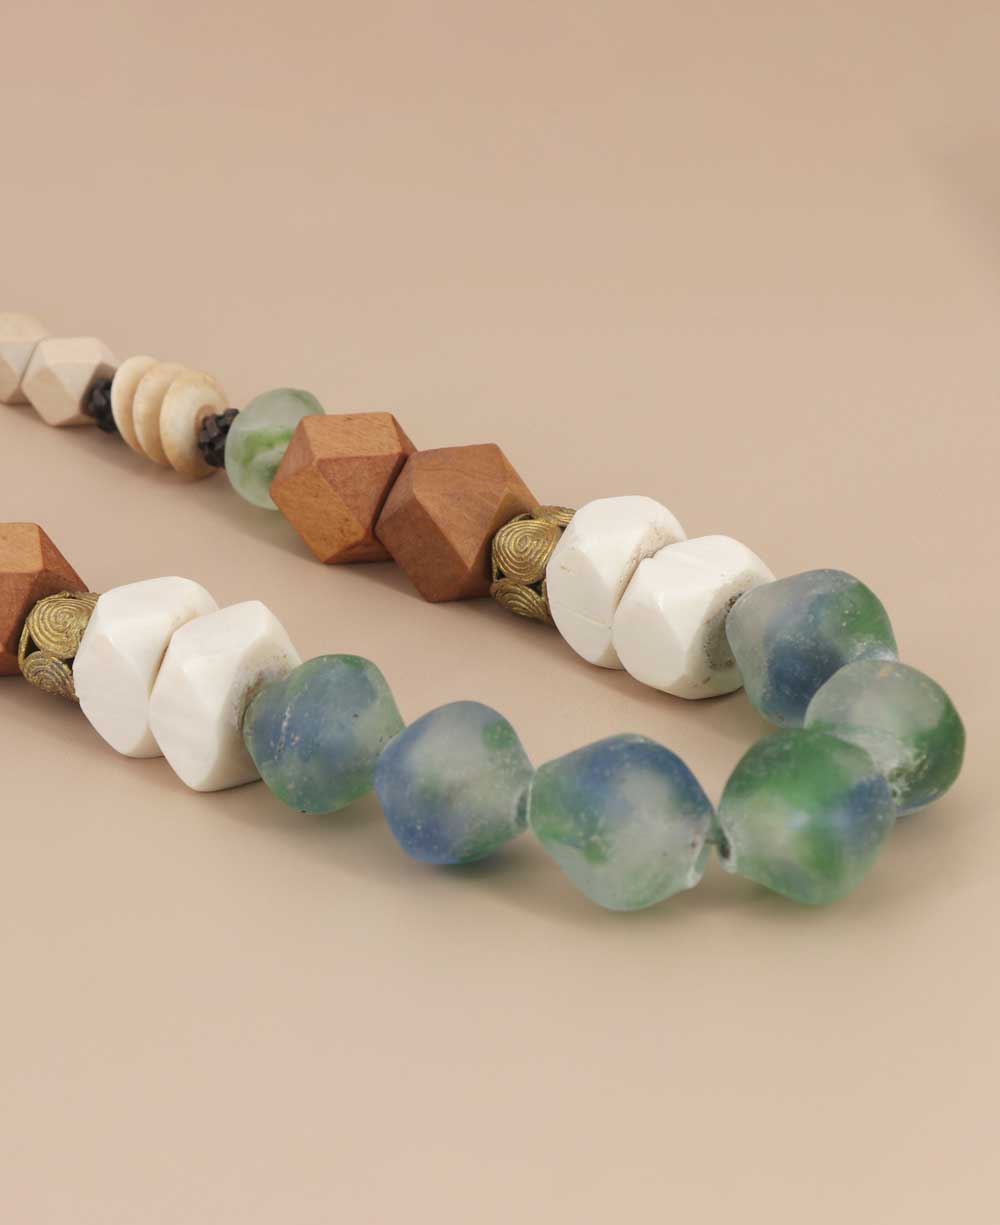 Handmade bead necklace in blue and green